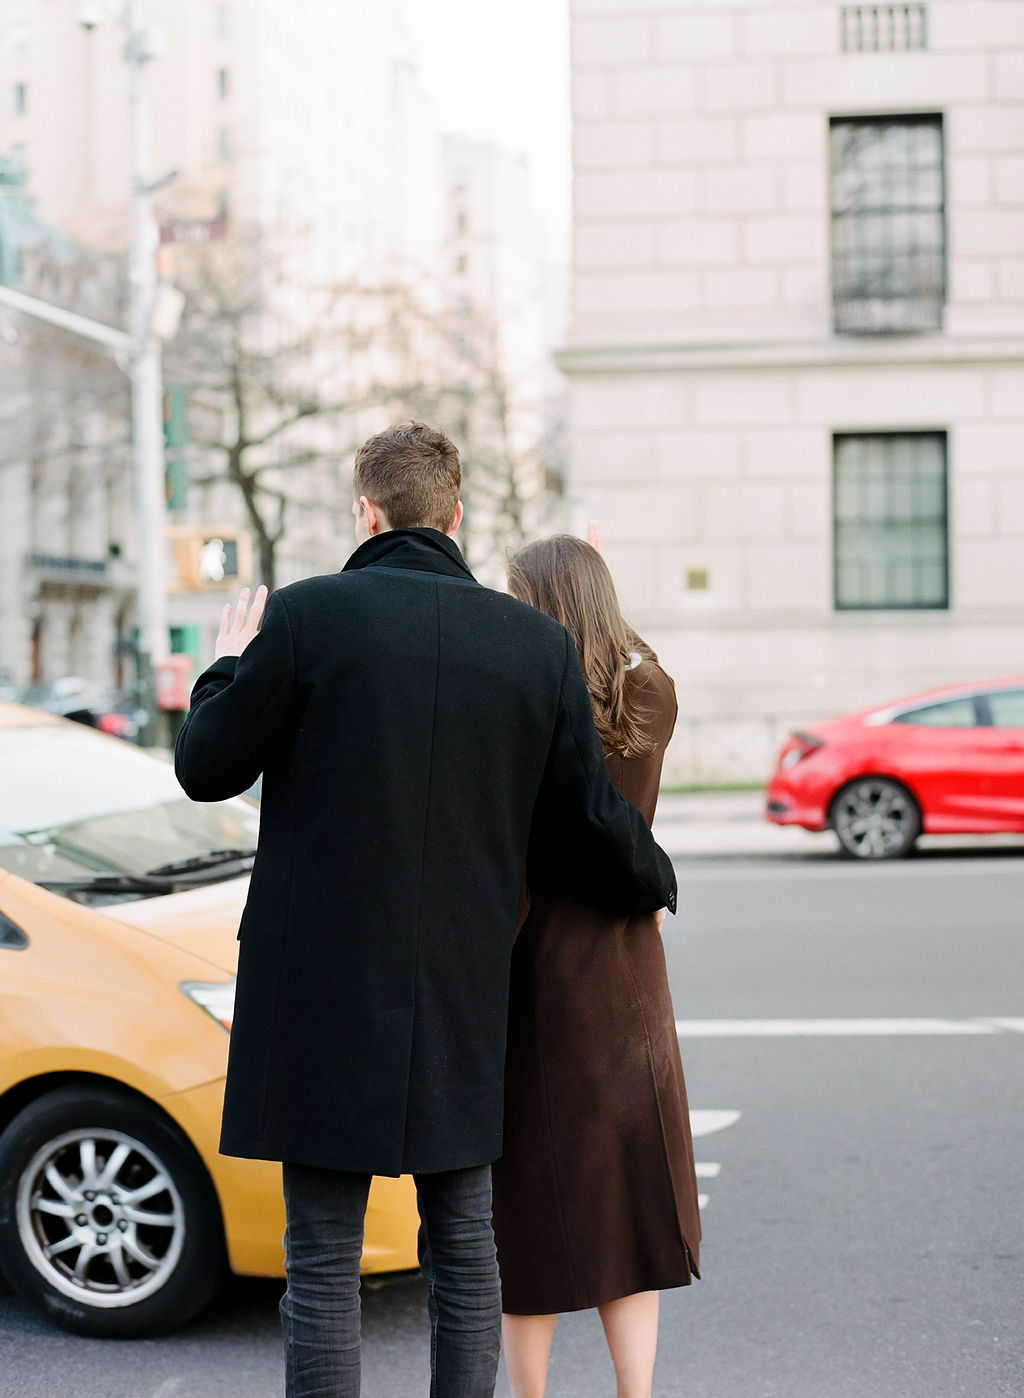 Upper East Side New York Engagement Session, Jacqueline Anne Photography